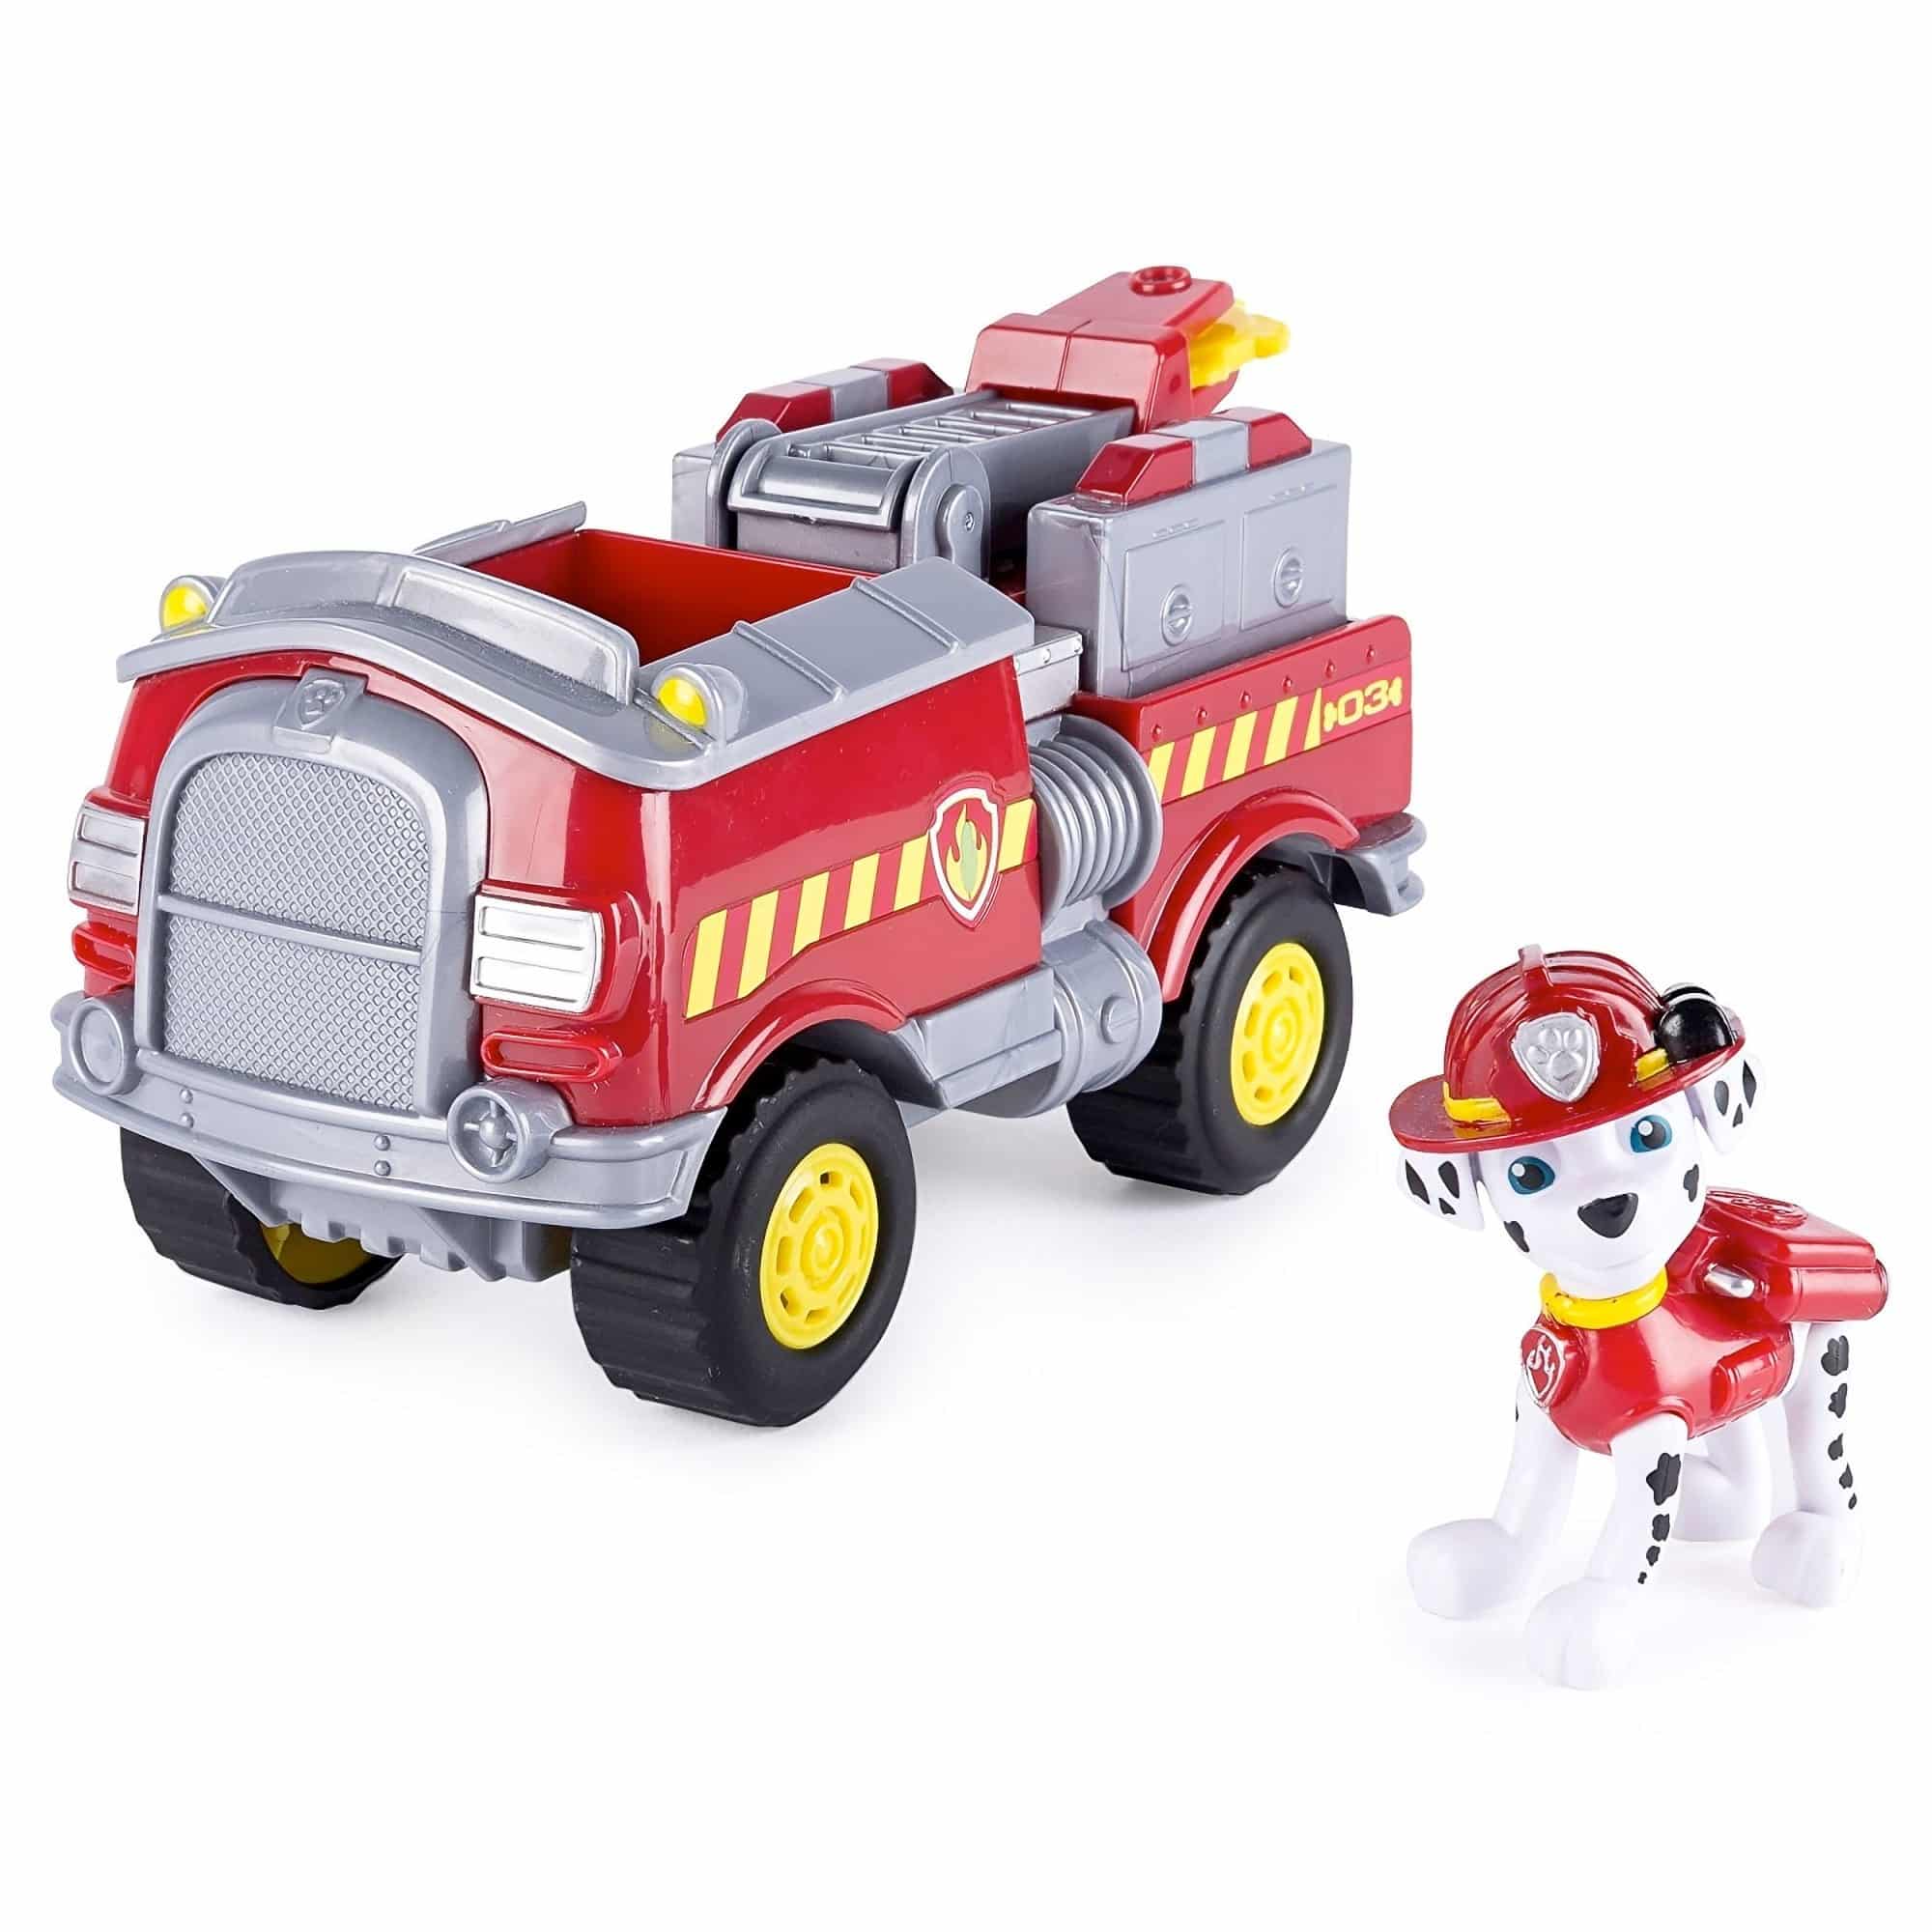 Nickelodeon - Paw Patrol - Marshall's Forest Vehicle